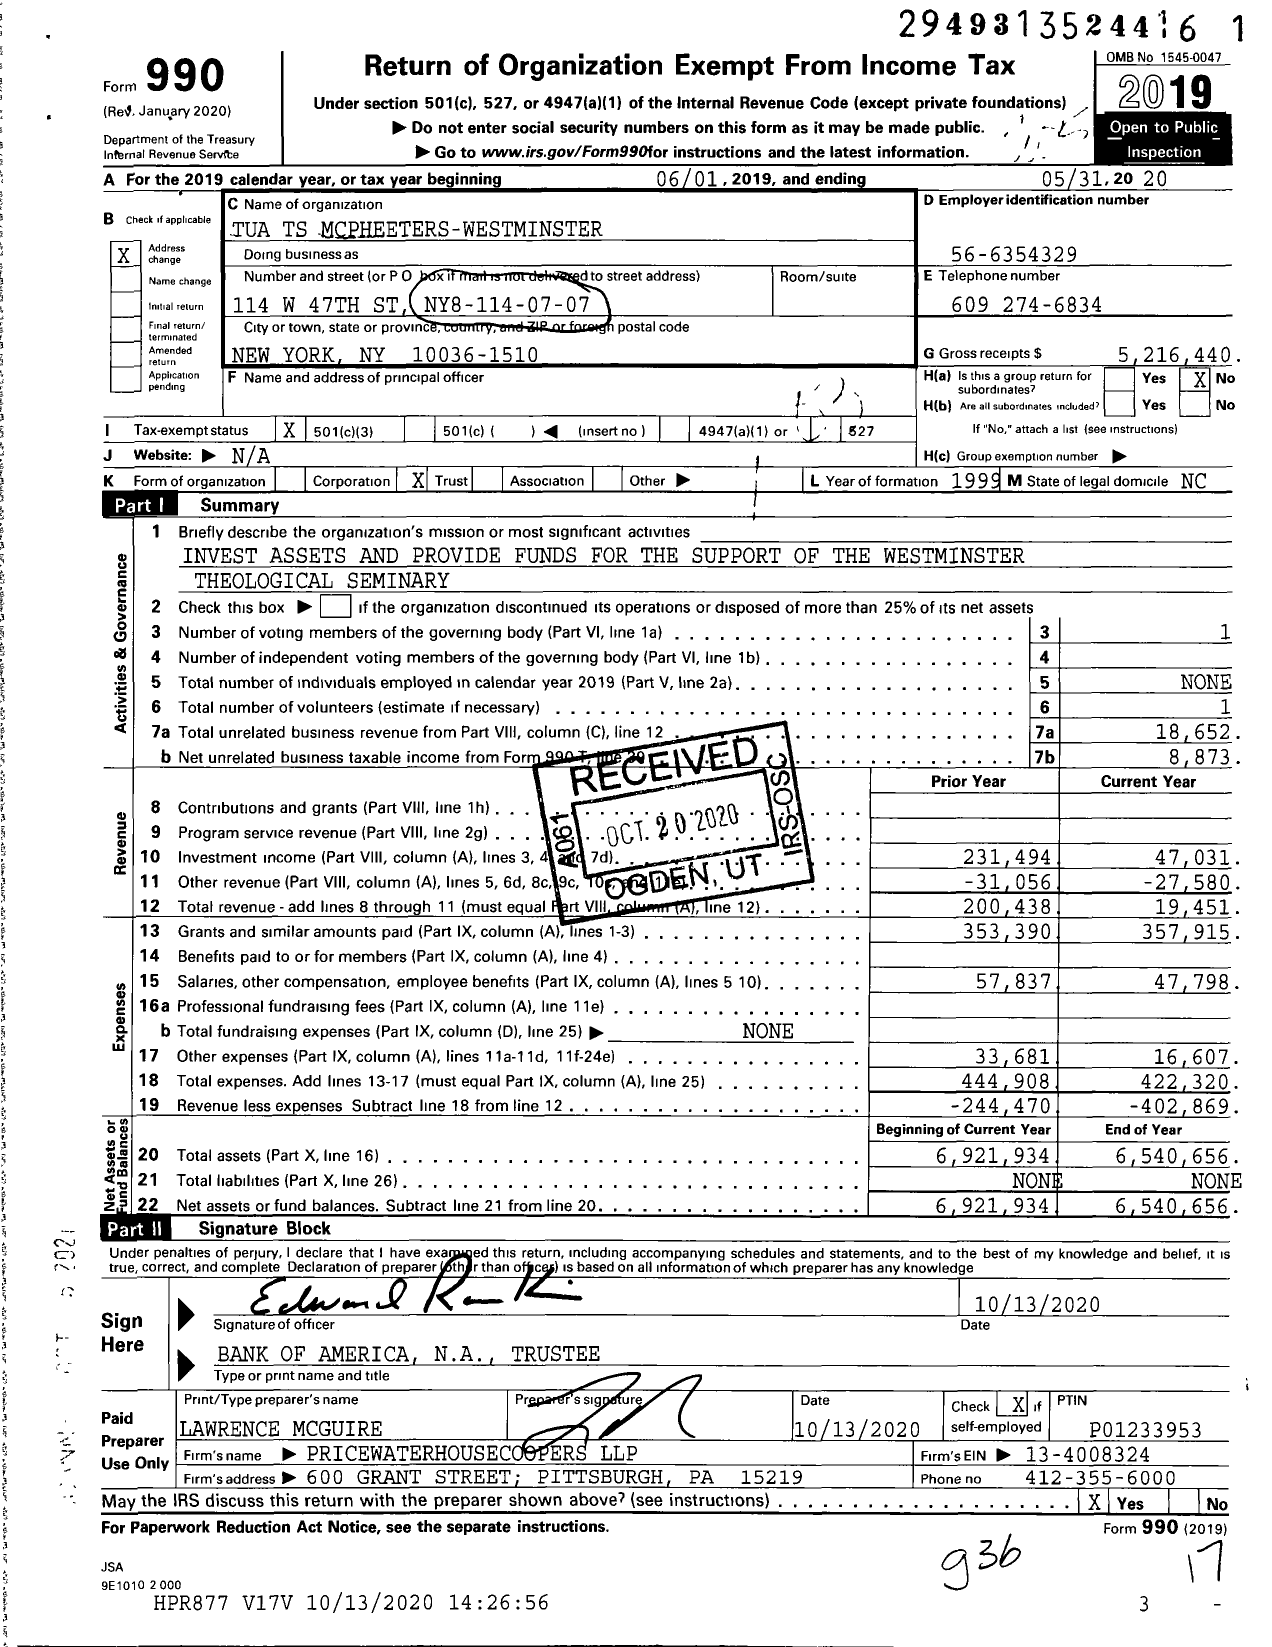 Image of first page of 2019 Form 990 for Tua TS Mcpheeters-Westminster